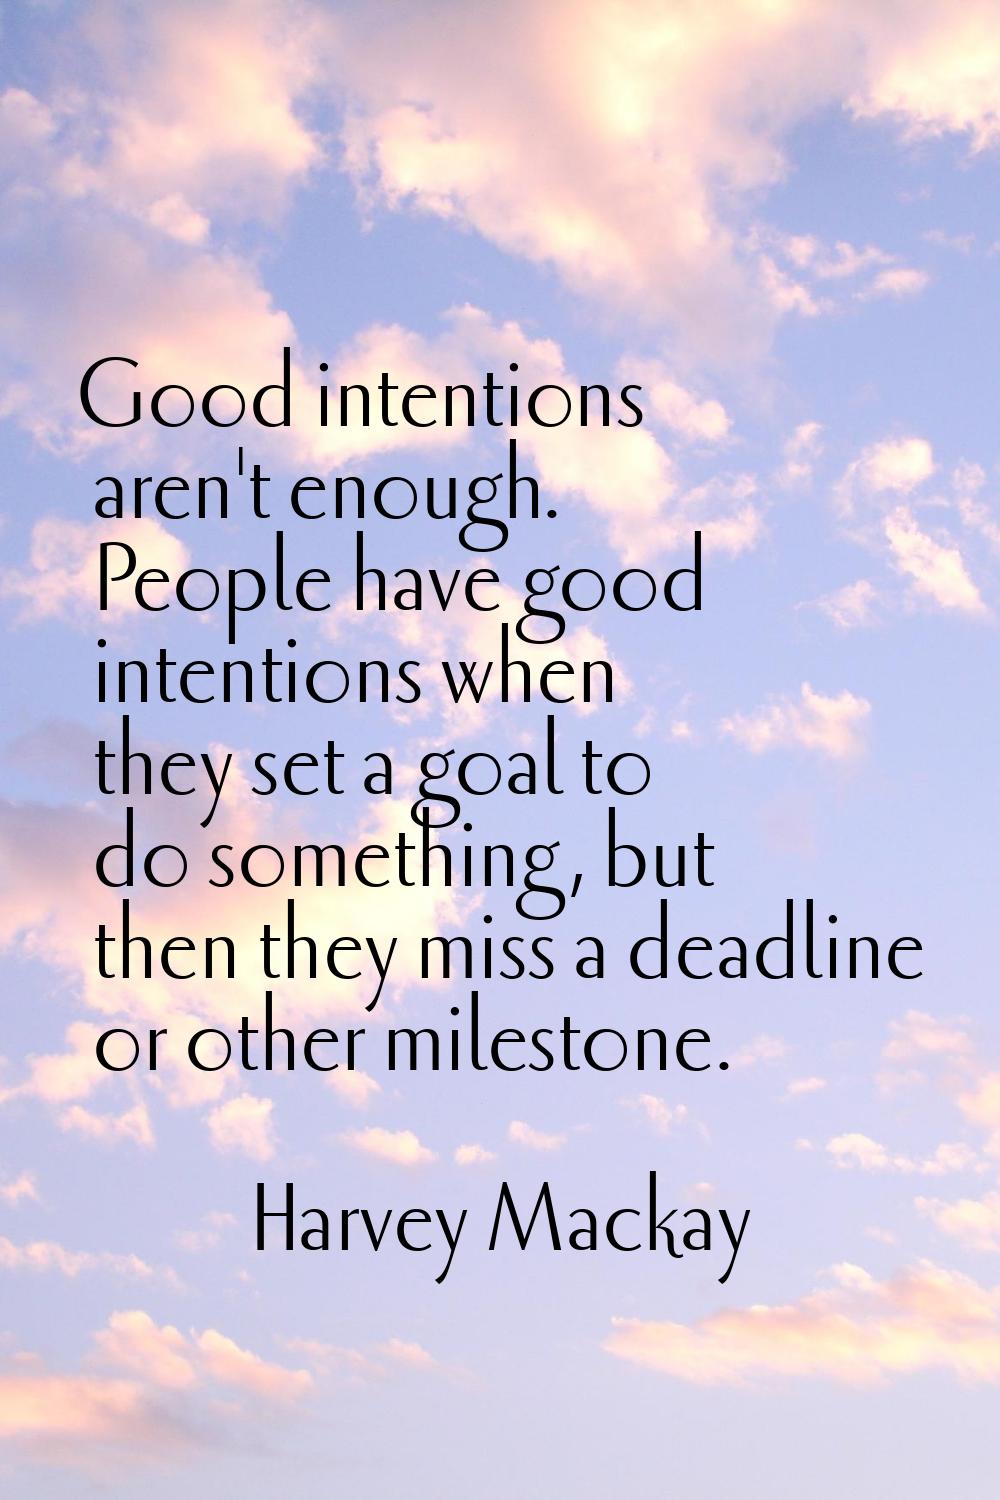 Good intentions aren't enough. People have good intentions when they set a goal to do something, bu